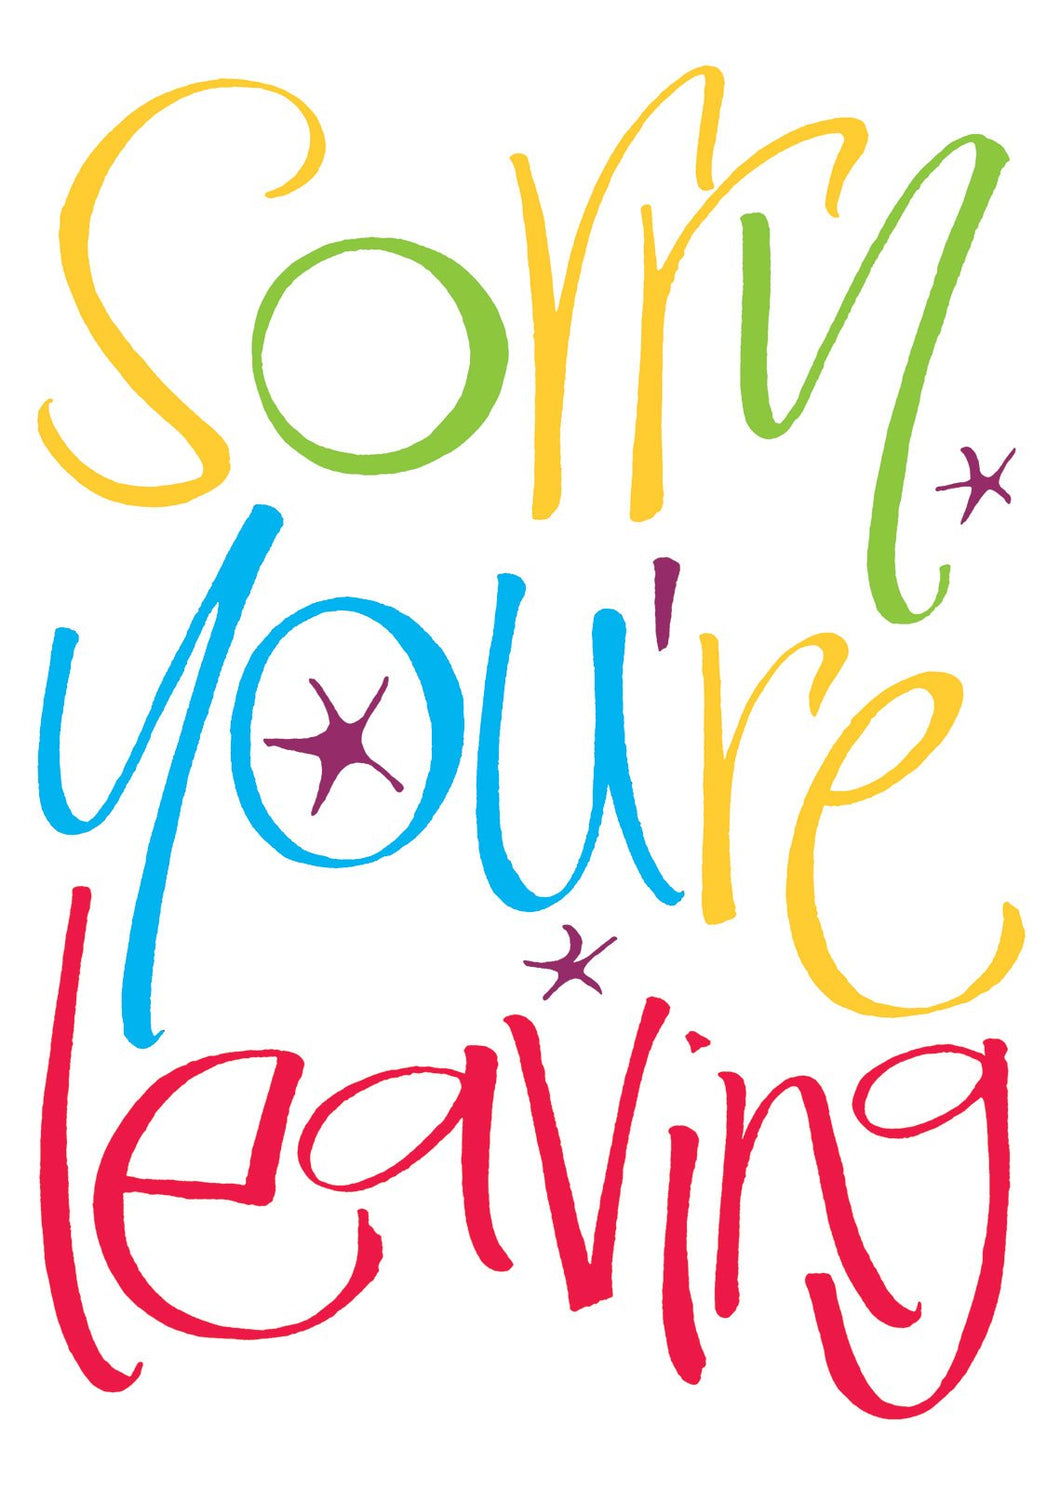 Sorry You're leaving colour